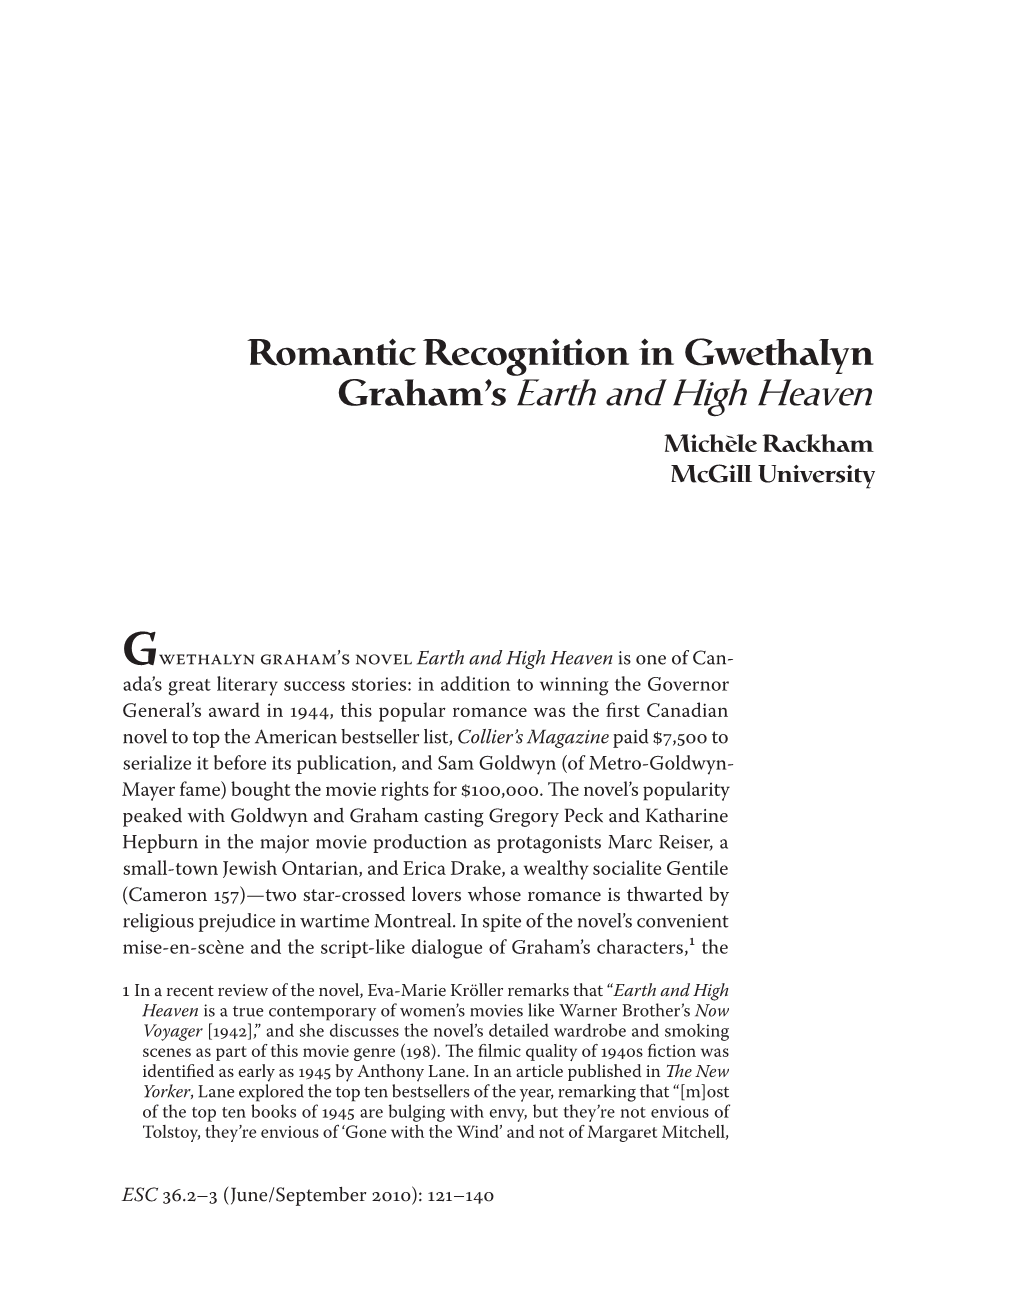 Romantic Recognition in Gwethalyn Graham's Earth and High Heaven